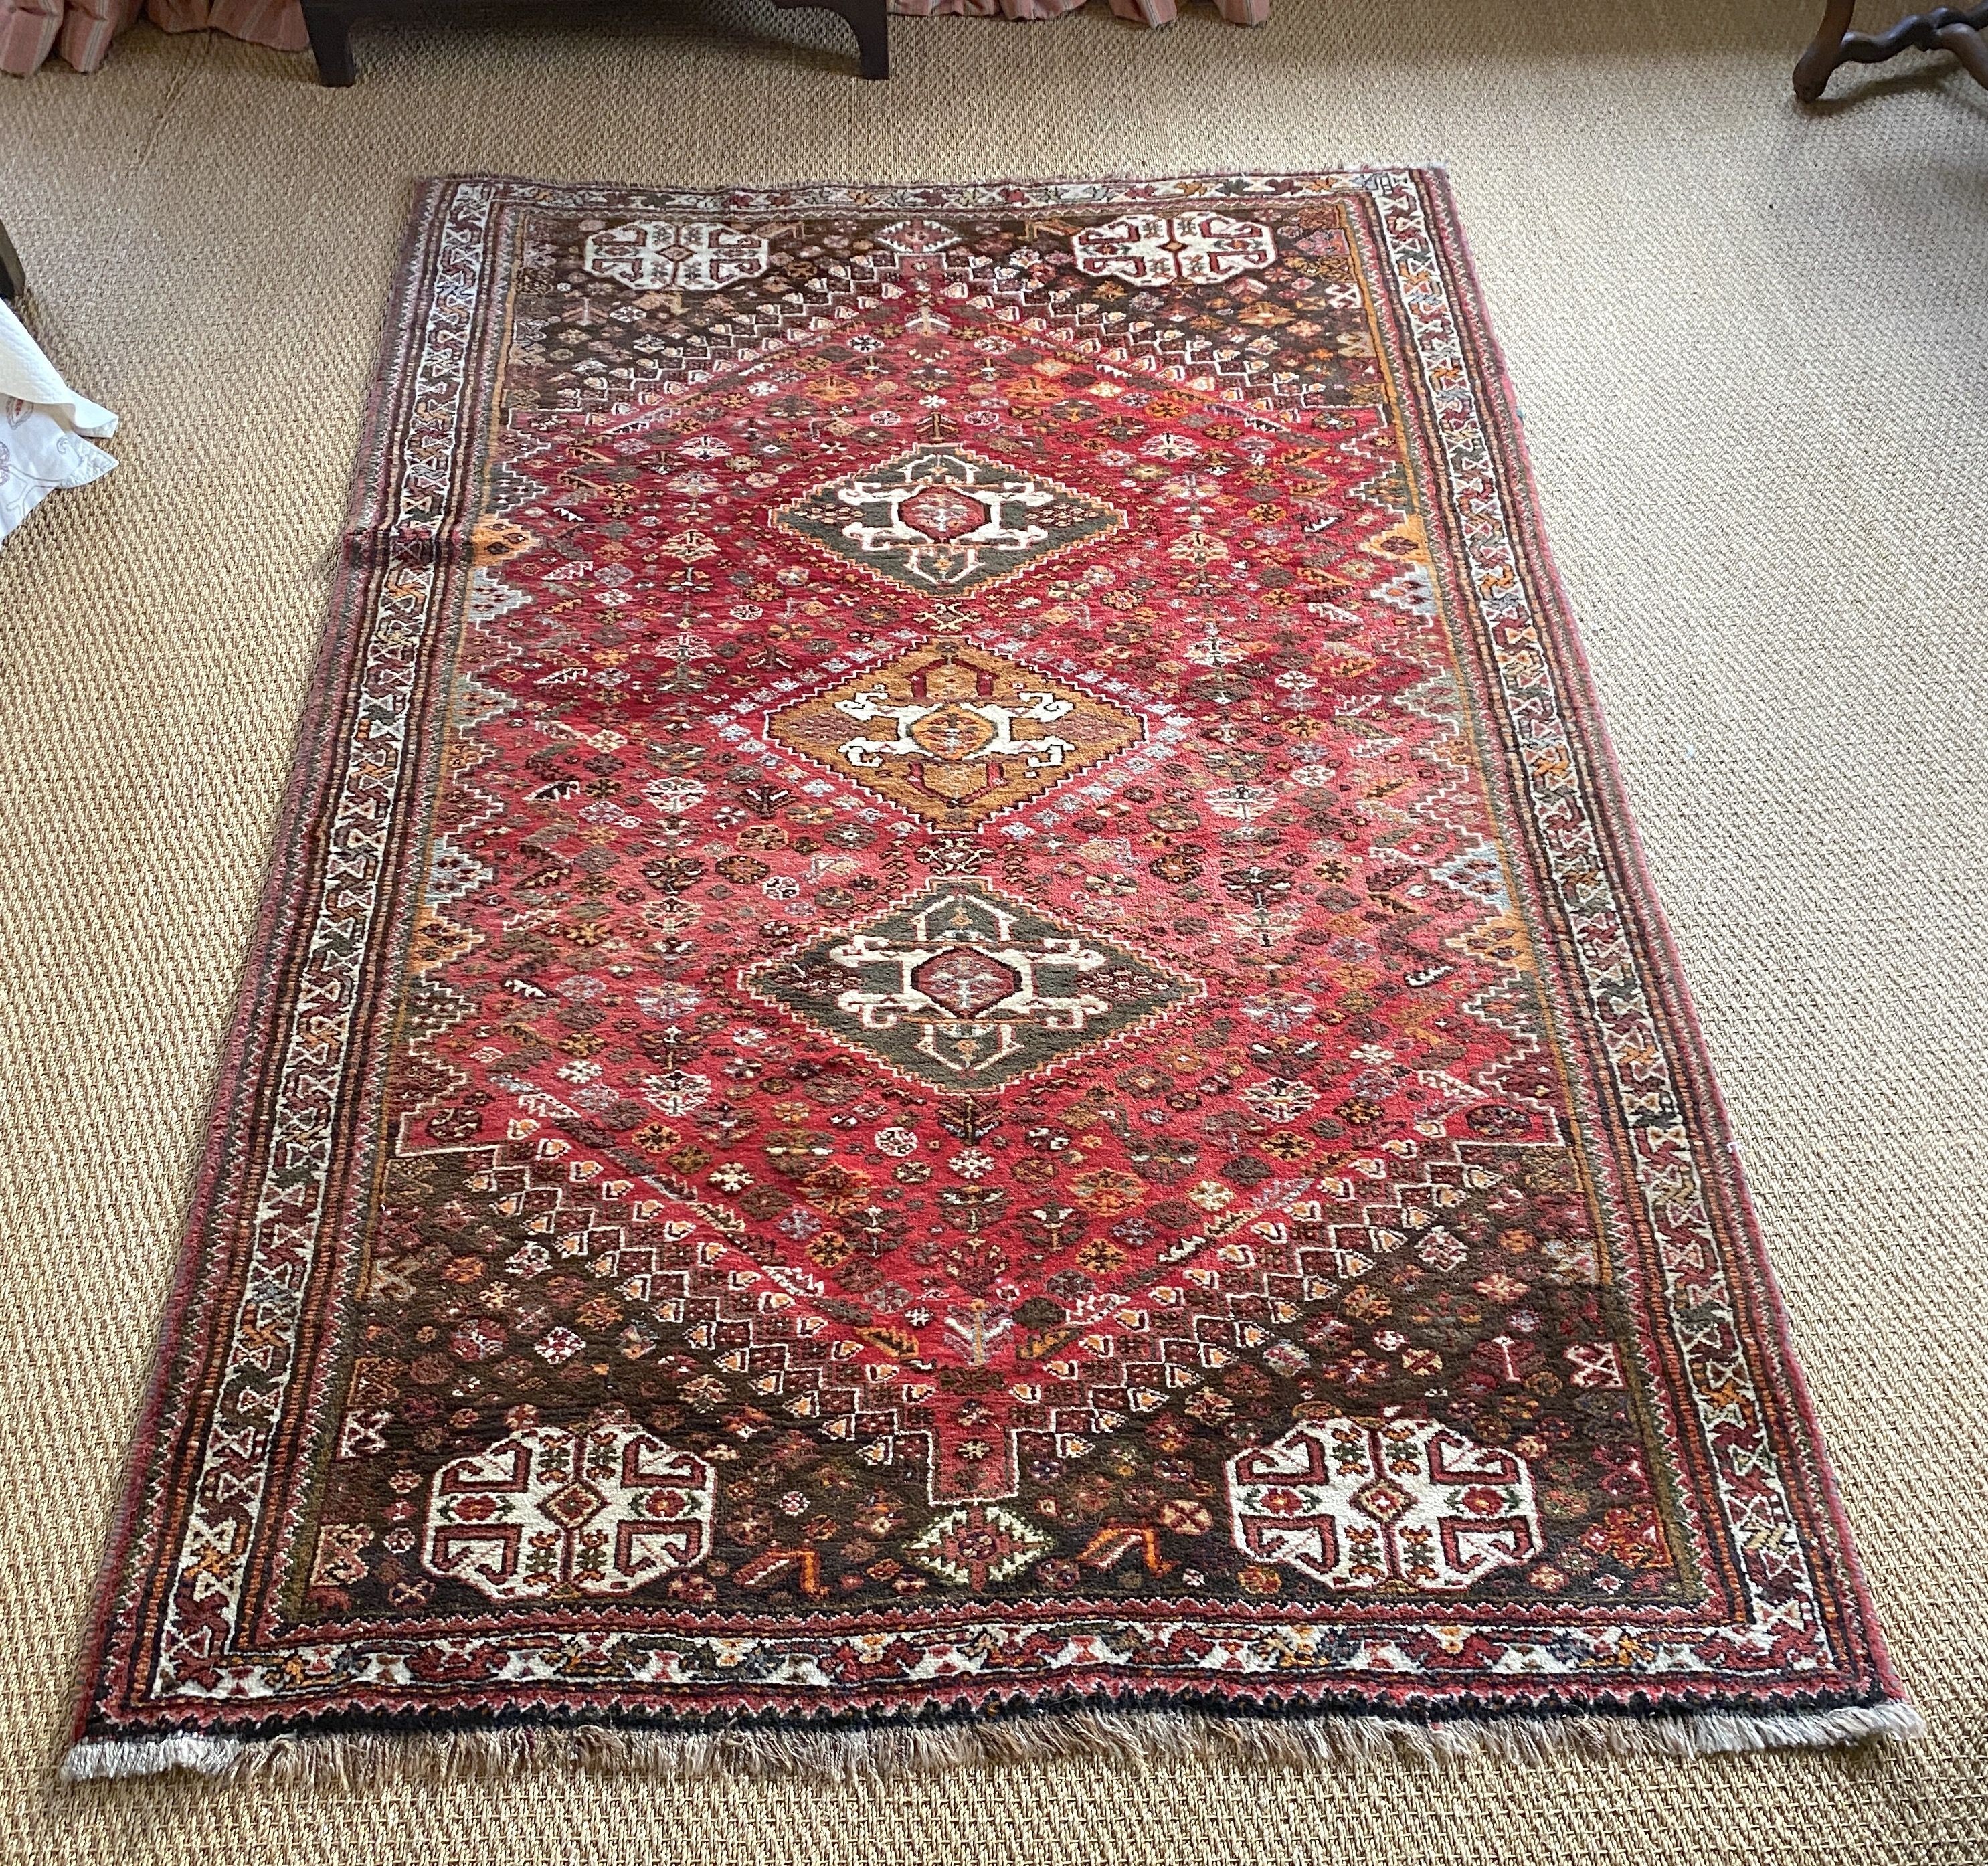 A Persian red ground rug, with three central hectagons and floral borders, 236 x 161cm